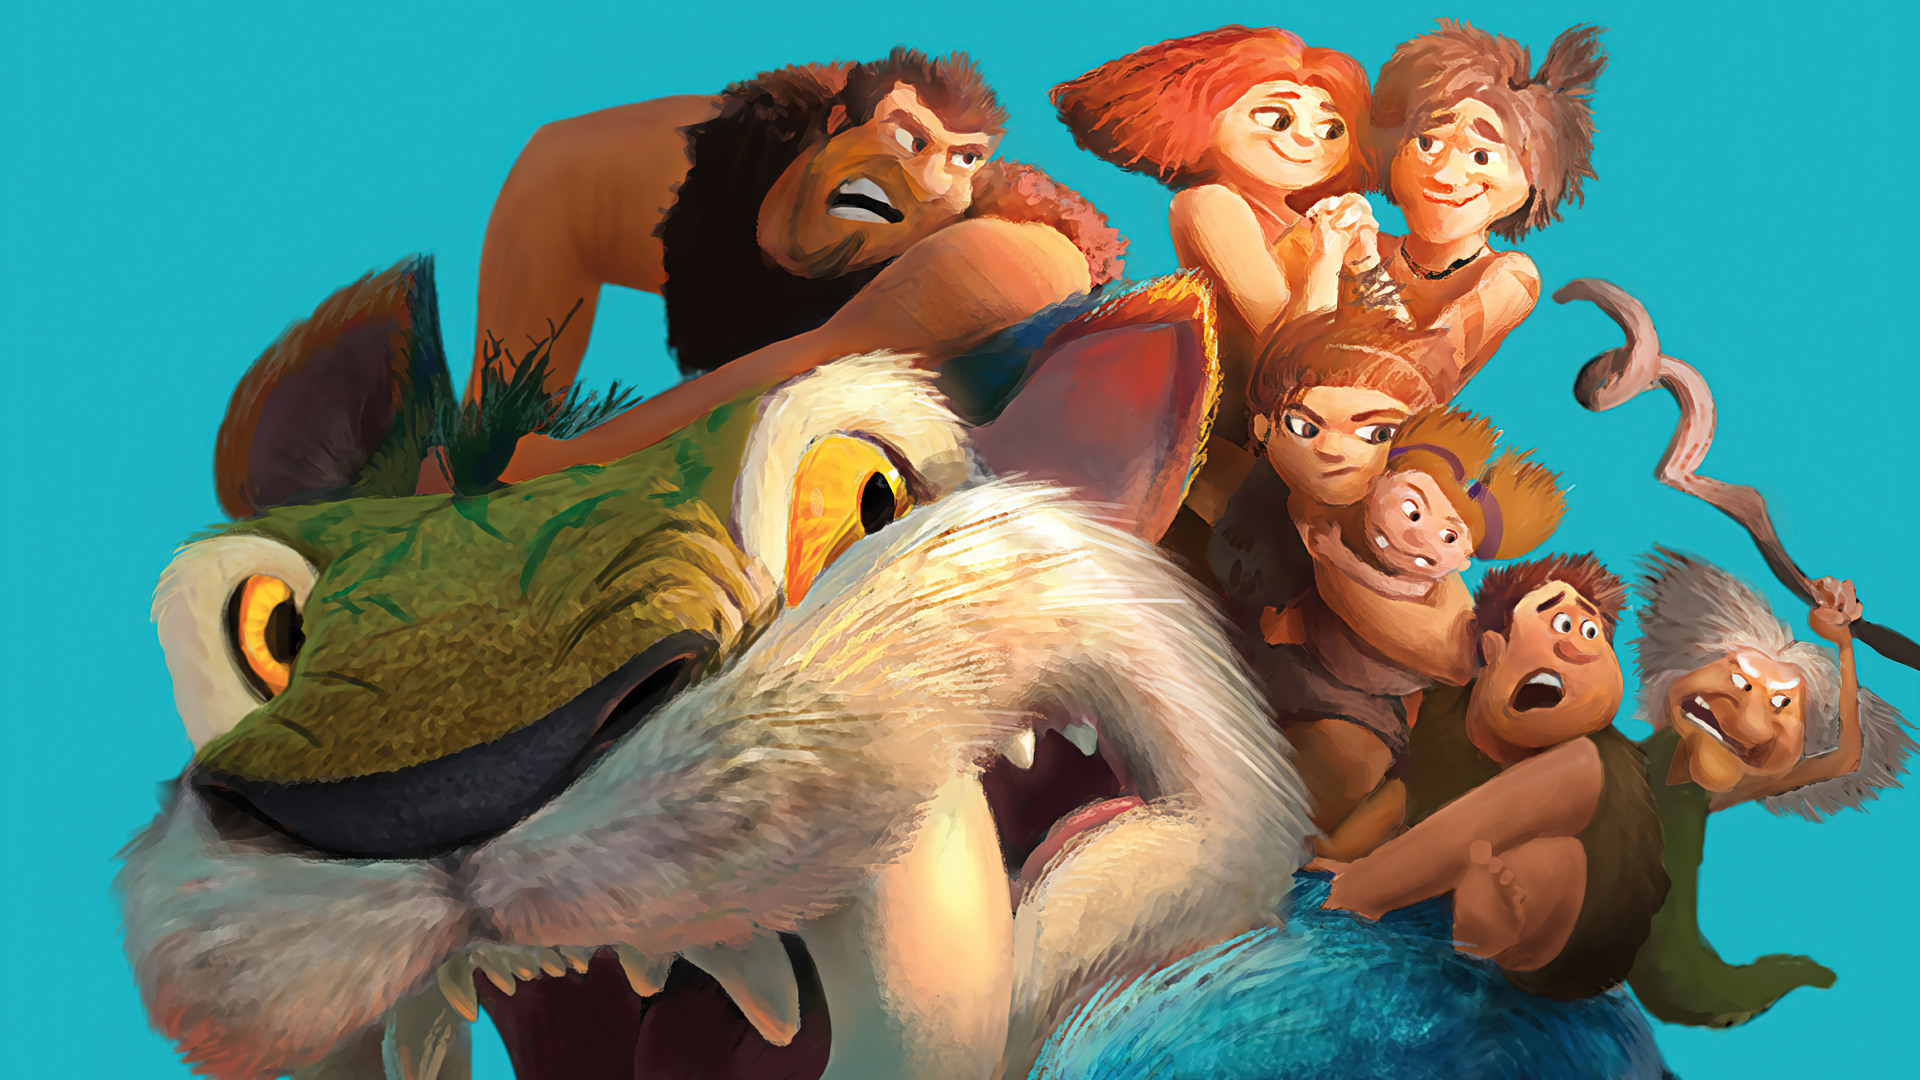 Eep The Croods Guy The Croods Thunk The Croods Grug The Croods Sandy The Croods Ugga The Croods Gran 1920x1080